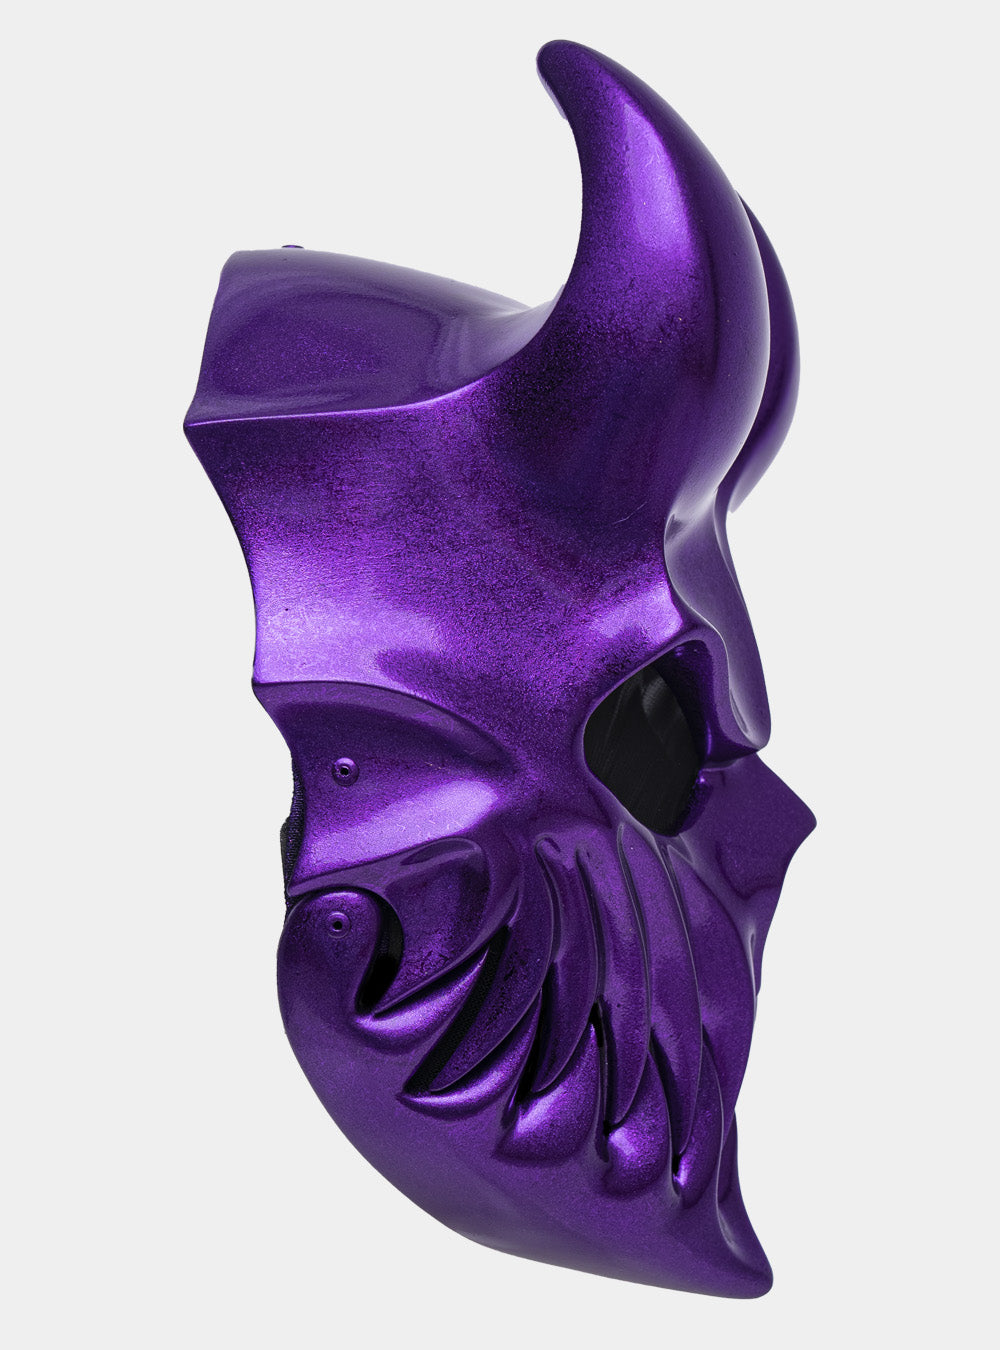 (SLAUGHTER TO PREVAIL) ALEX TERRIBLE MASK “KID OF DARKNESS” (PURPLE)